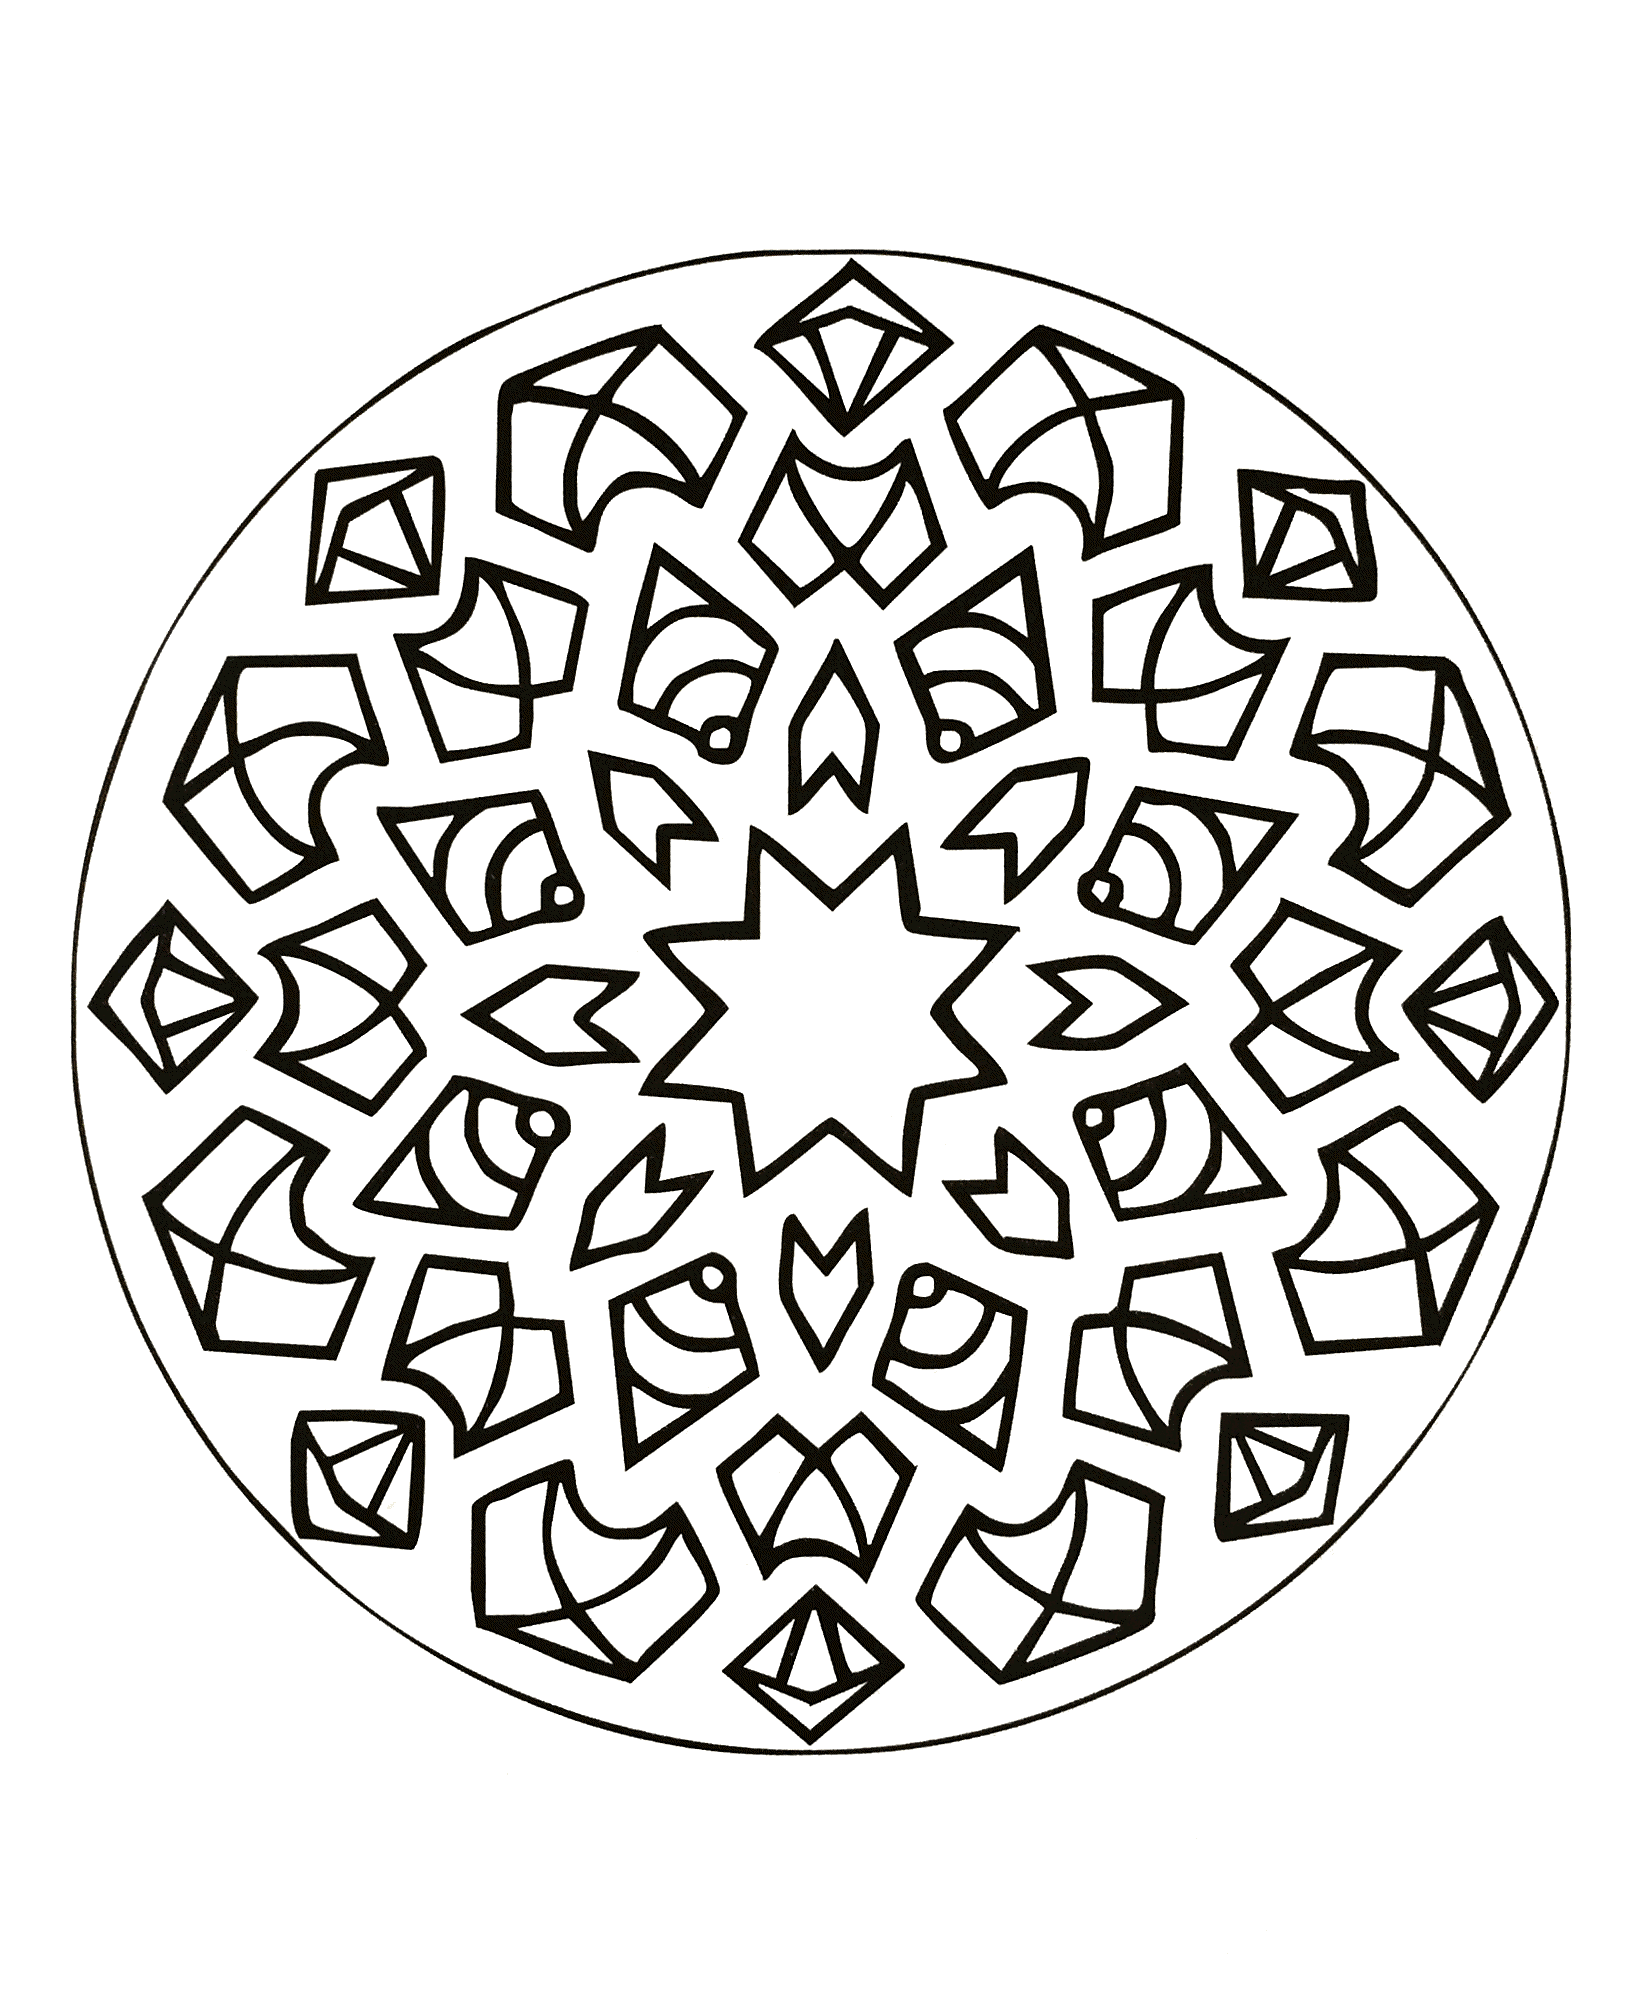 Incredible Mandalas coloring page to print and color for free